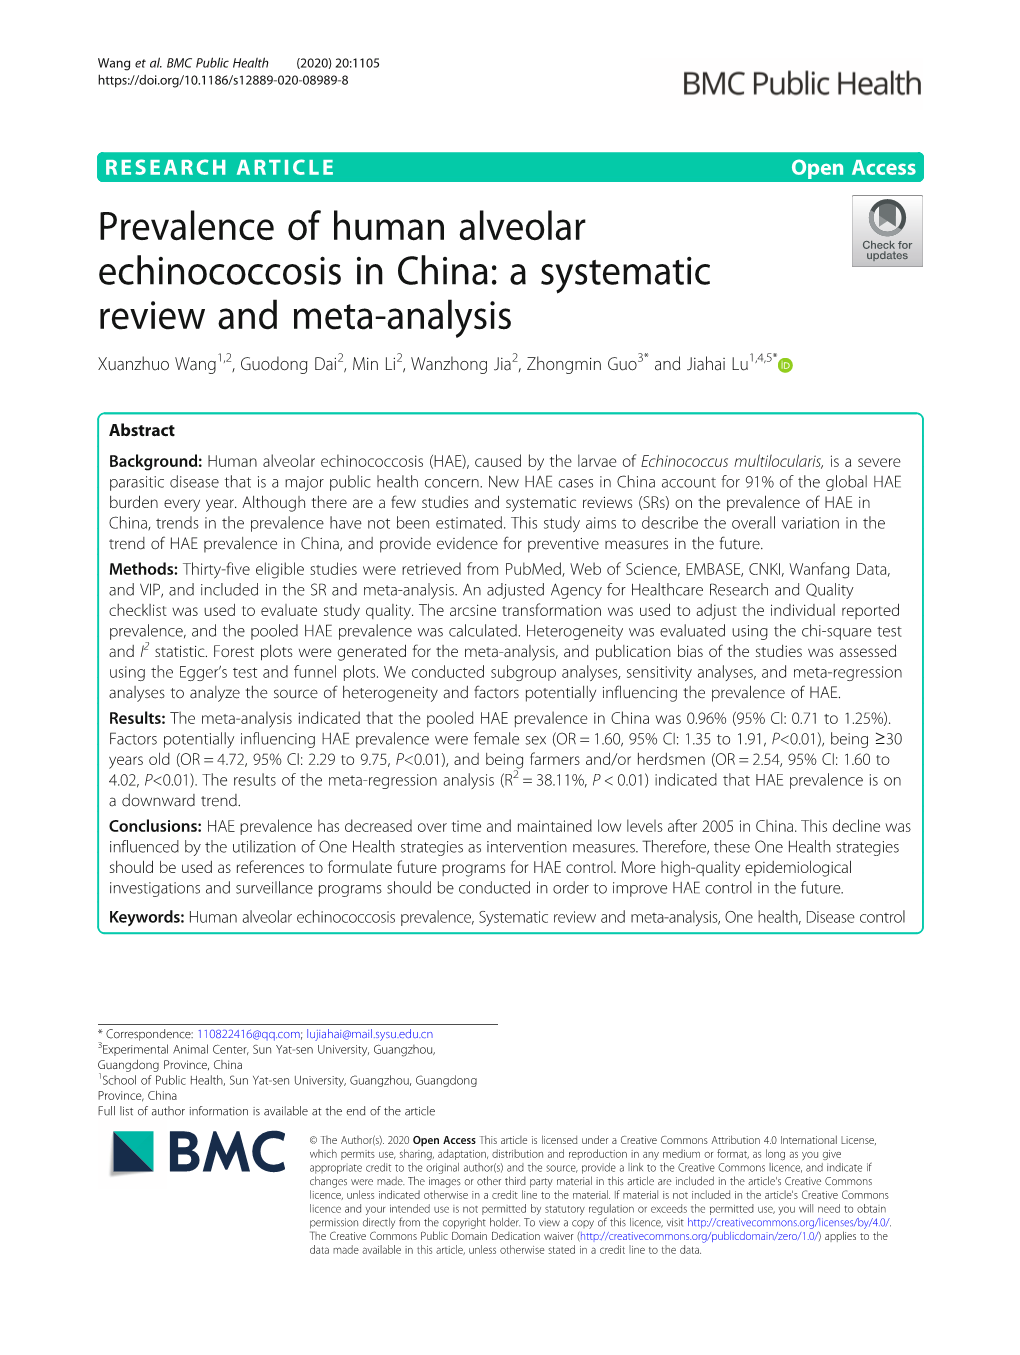 Prevalence of Human Alveolar Echinococcosis in China: A